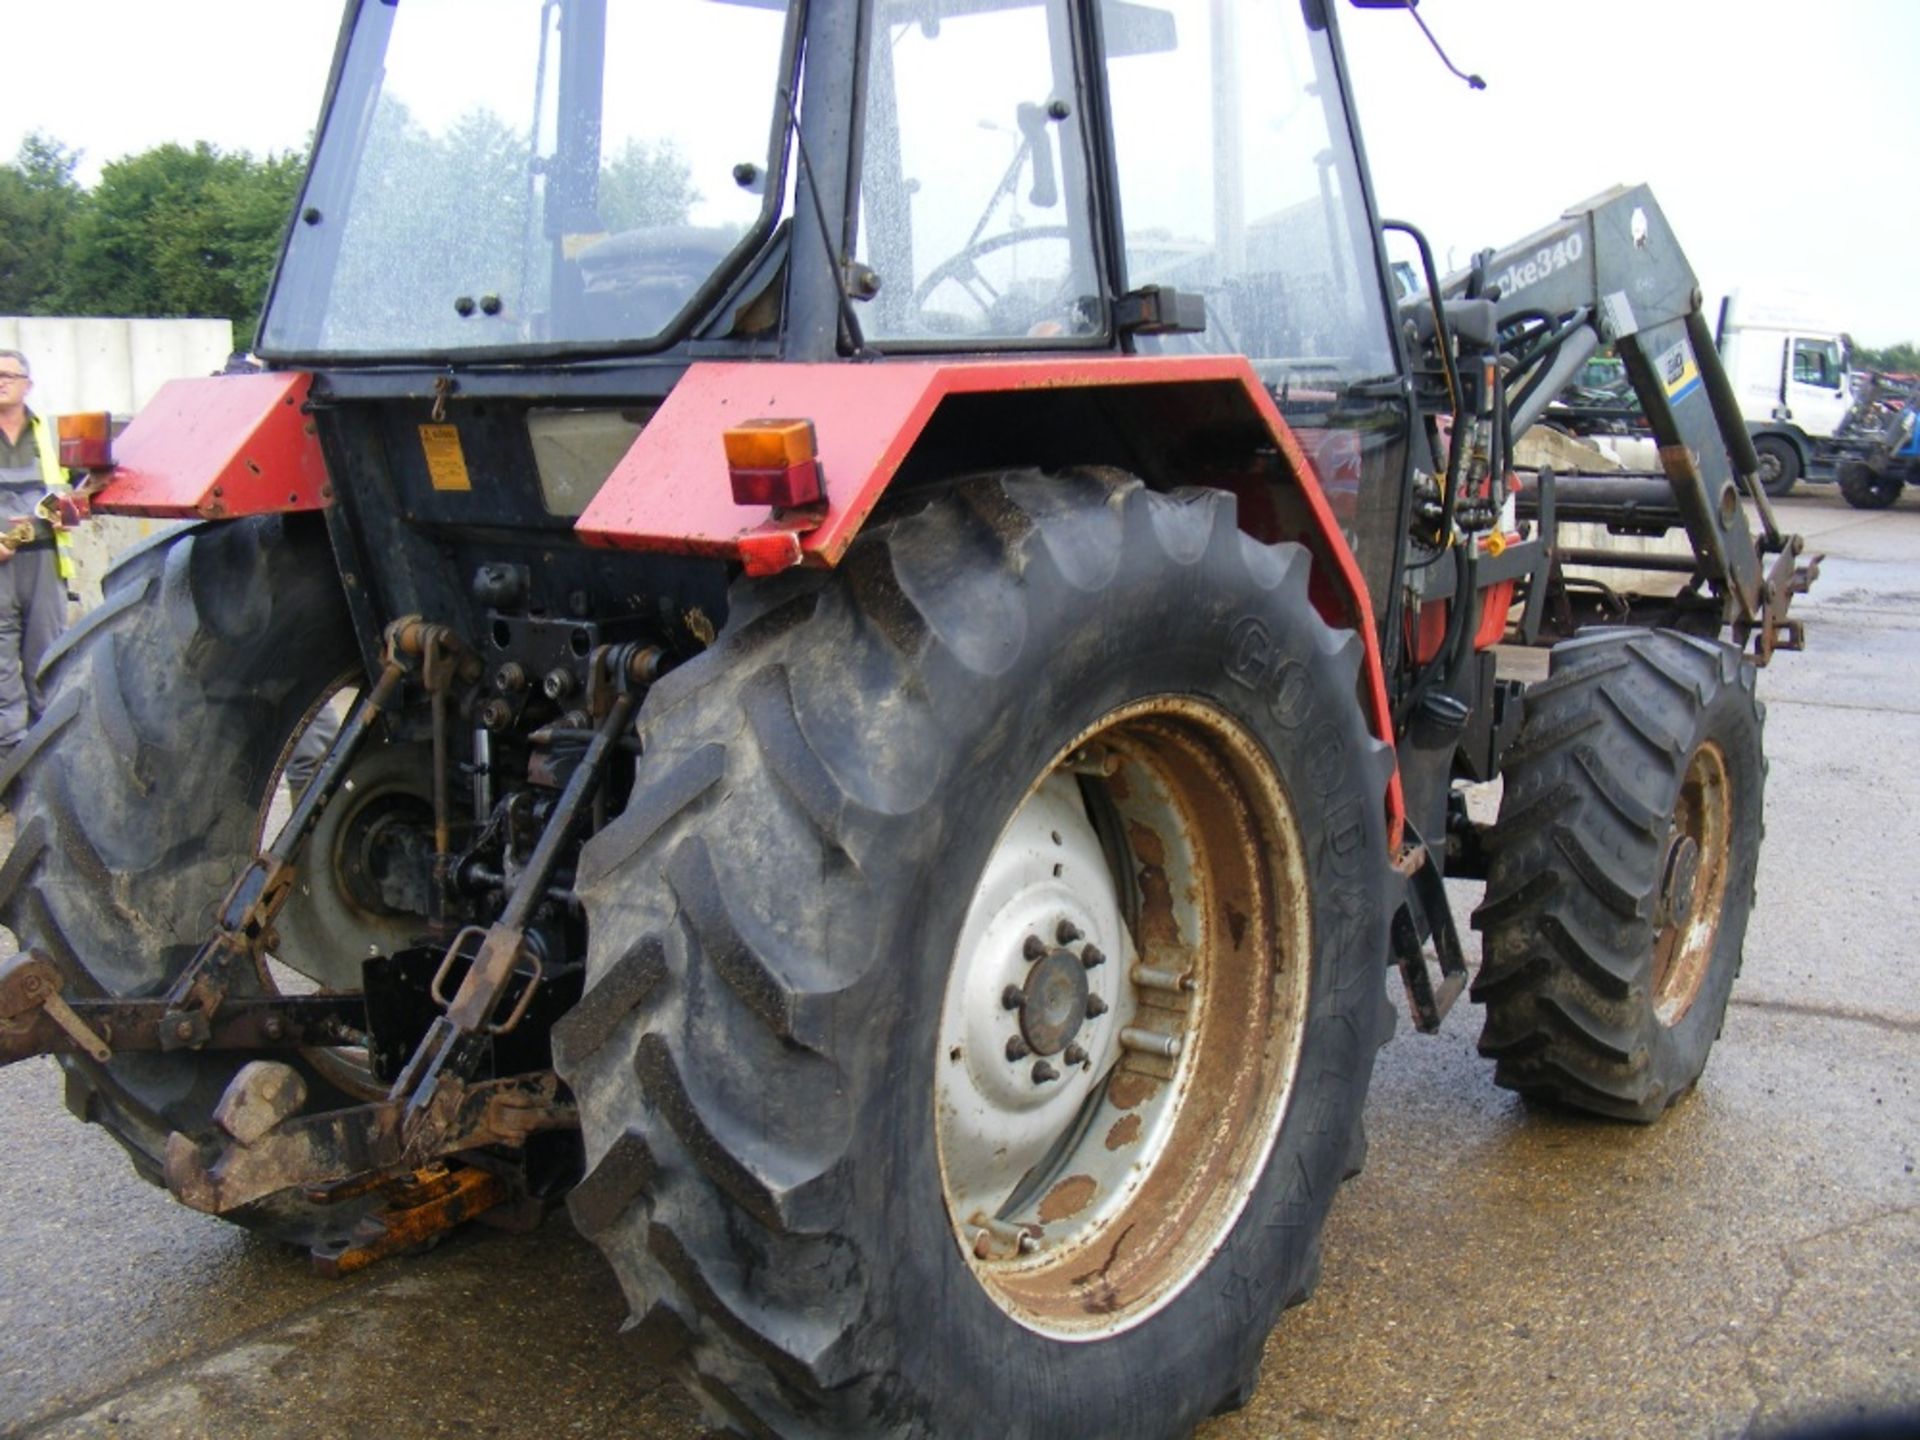 Case International 4240 Pro 4wd Tractor with Quicke 340 Loader. V5 will be supplied. Reg. No. P307 - Image 5 of 6